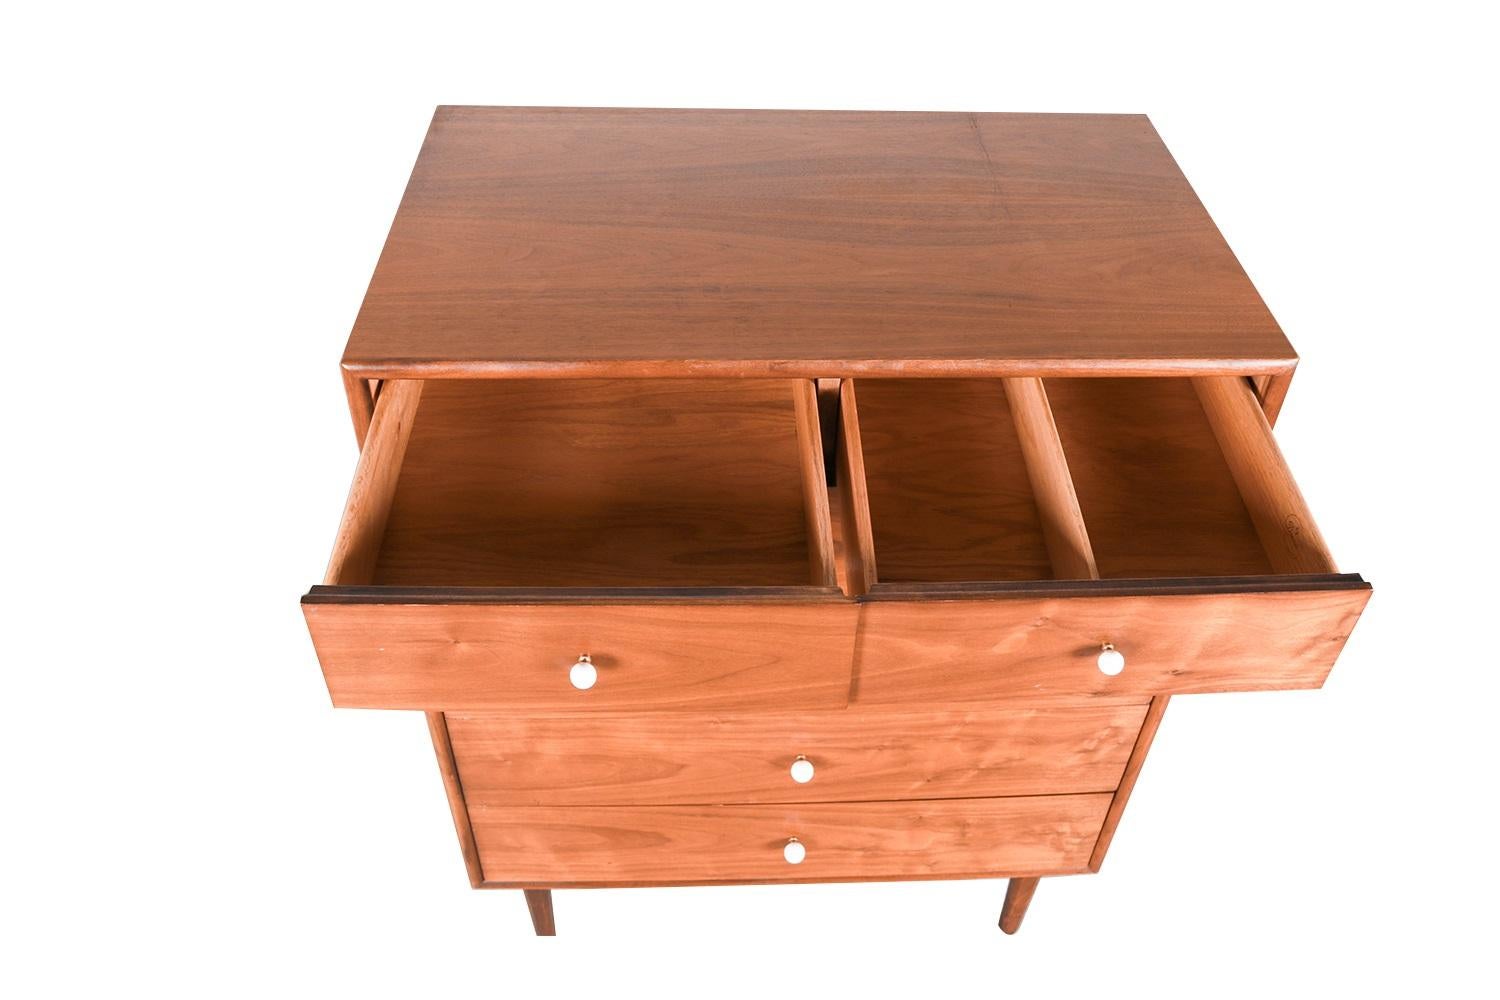 Beautiful Mid-Century Modern tall dresser/highboy/chest of drawers designed by Kipp Stewart and Stewart MacDougall for Drexel’s Declaration Collection, circa 1960s. Featuring a solid, beautifully grained walnut wood case and frame, housing six